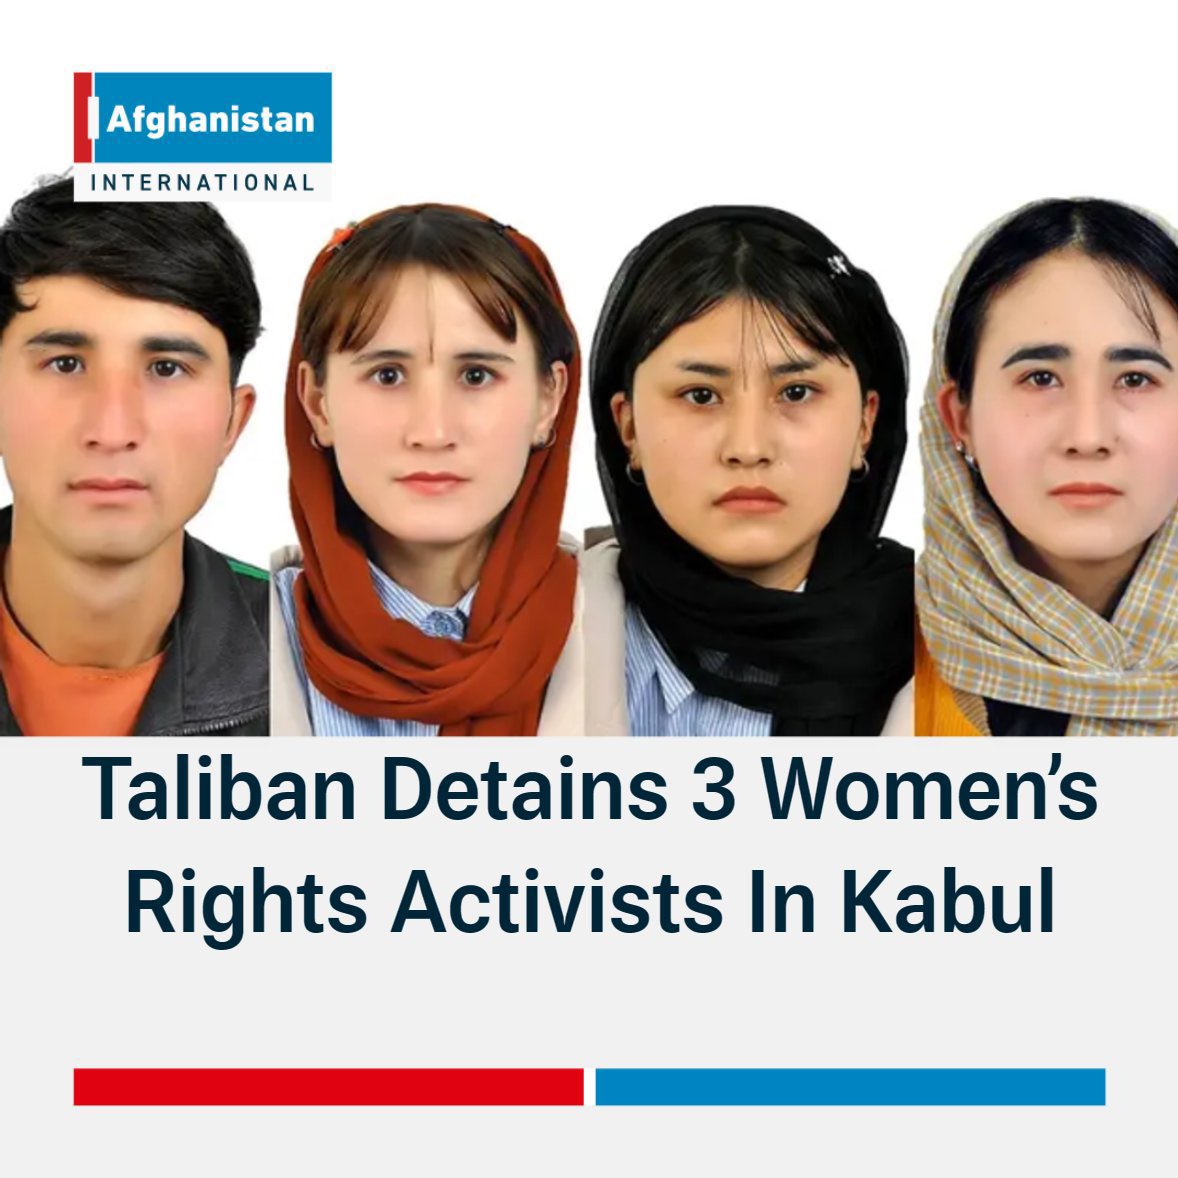 Taliban arrested 4 siblings including 3 sisters and 1 brother because they were social activists who fighting against abuses and discrimination in Afghanistan. #Nototaliban #StopHazaraGenocide